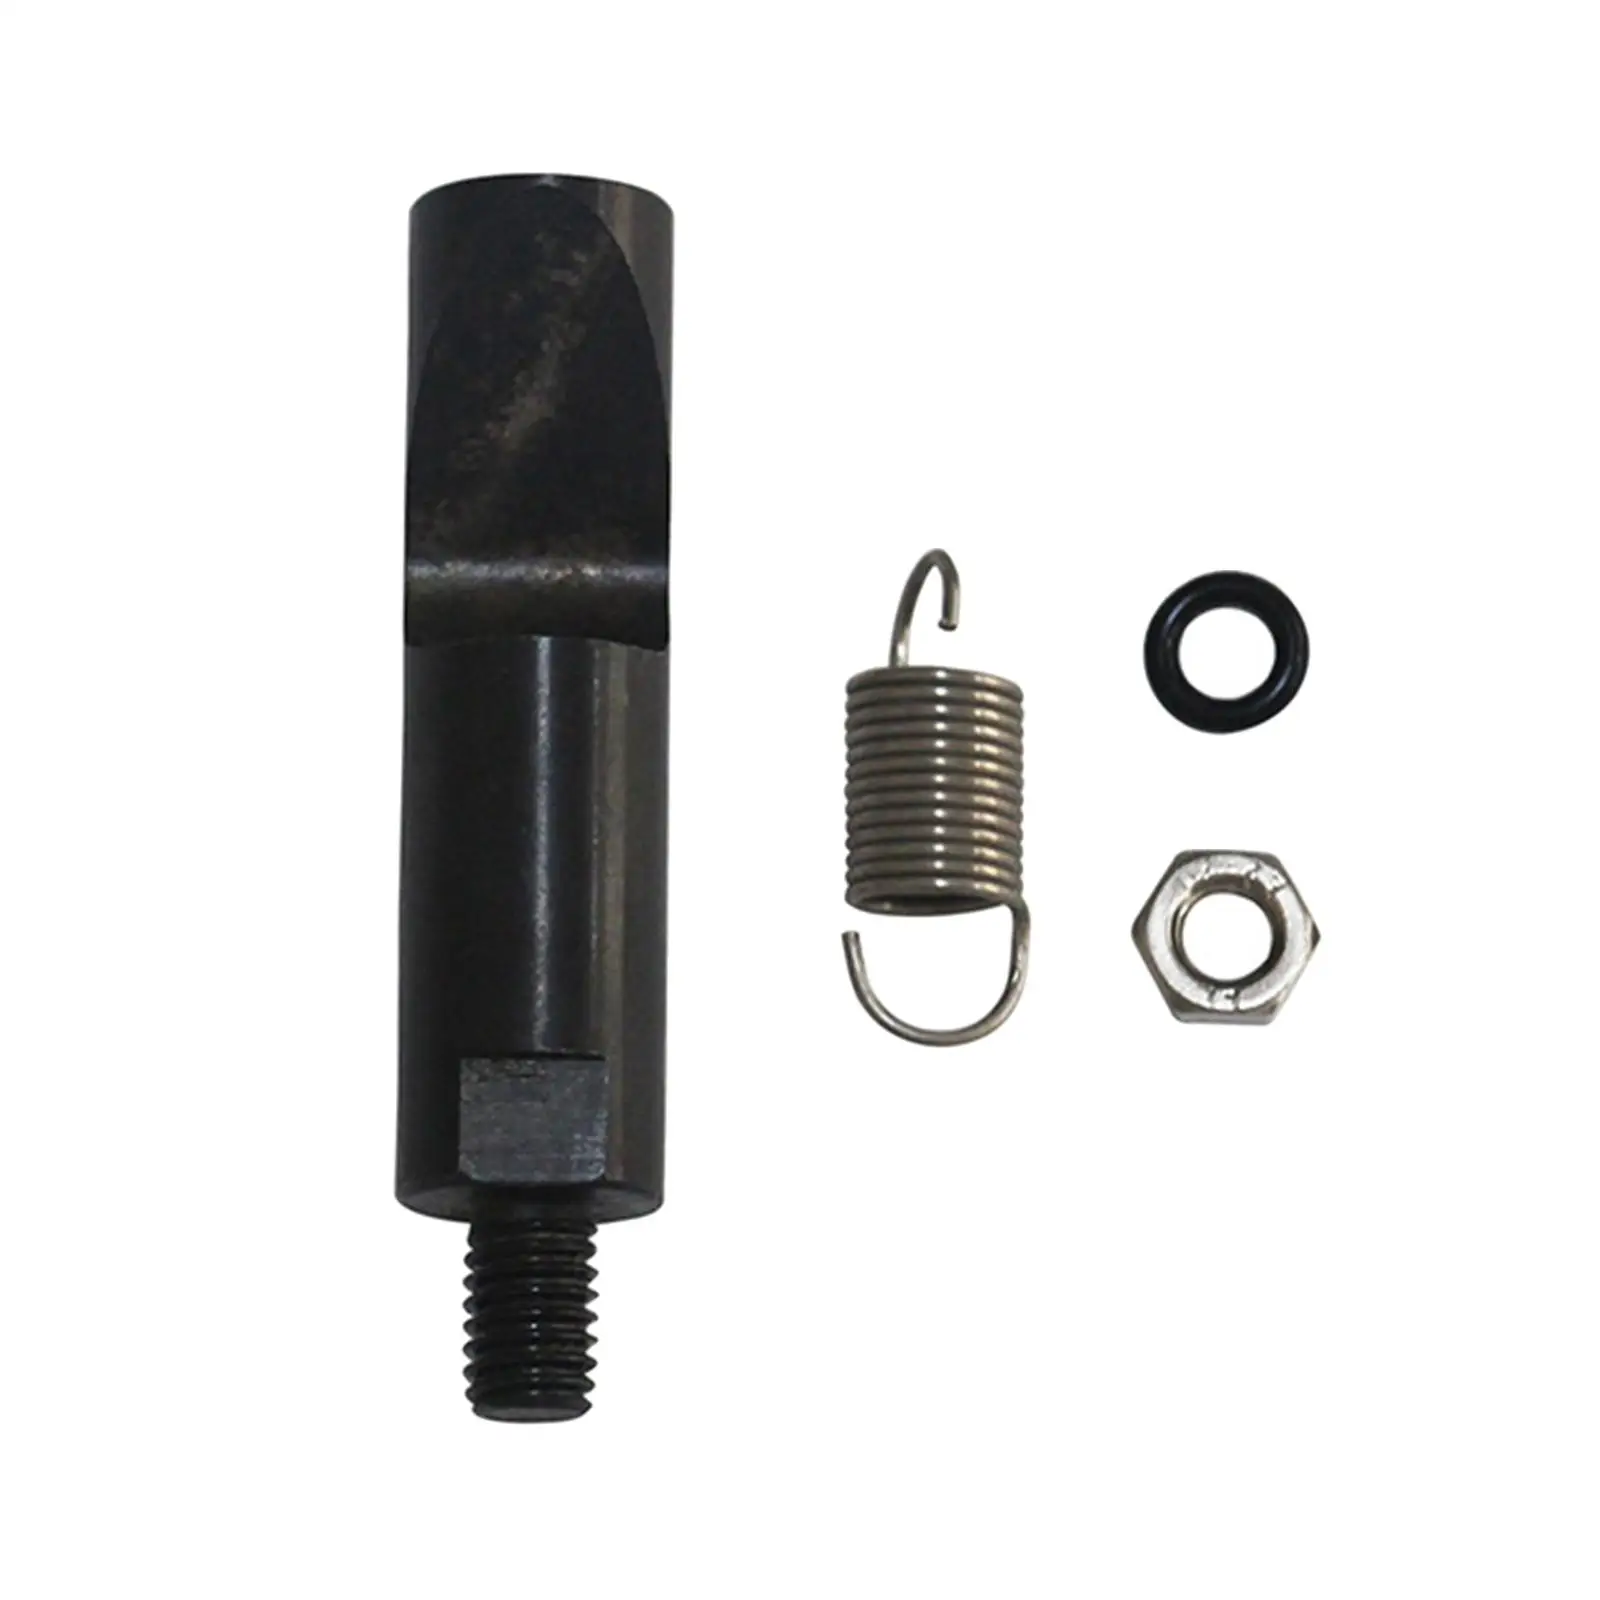 Fuel Pin Kit Simple Installation Aluminum Alloy Reliable Repair 1040178 for Dodge Cummins 1988 to 1993 5.9L Hand Tool Parts